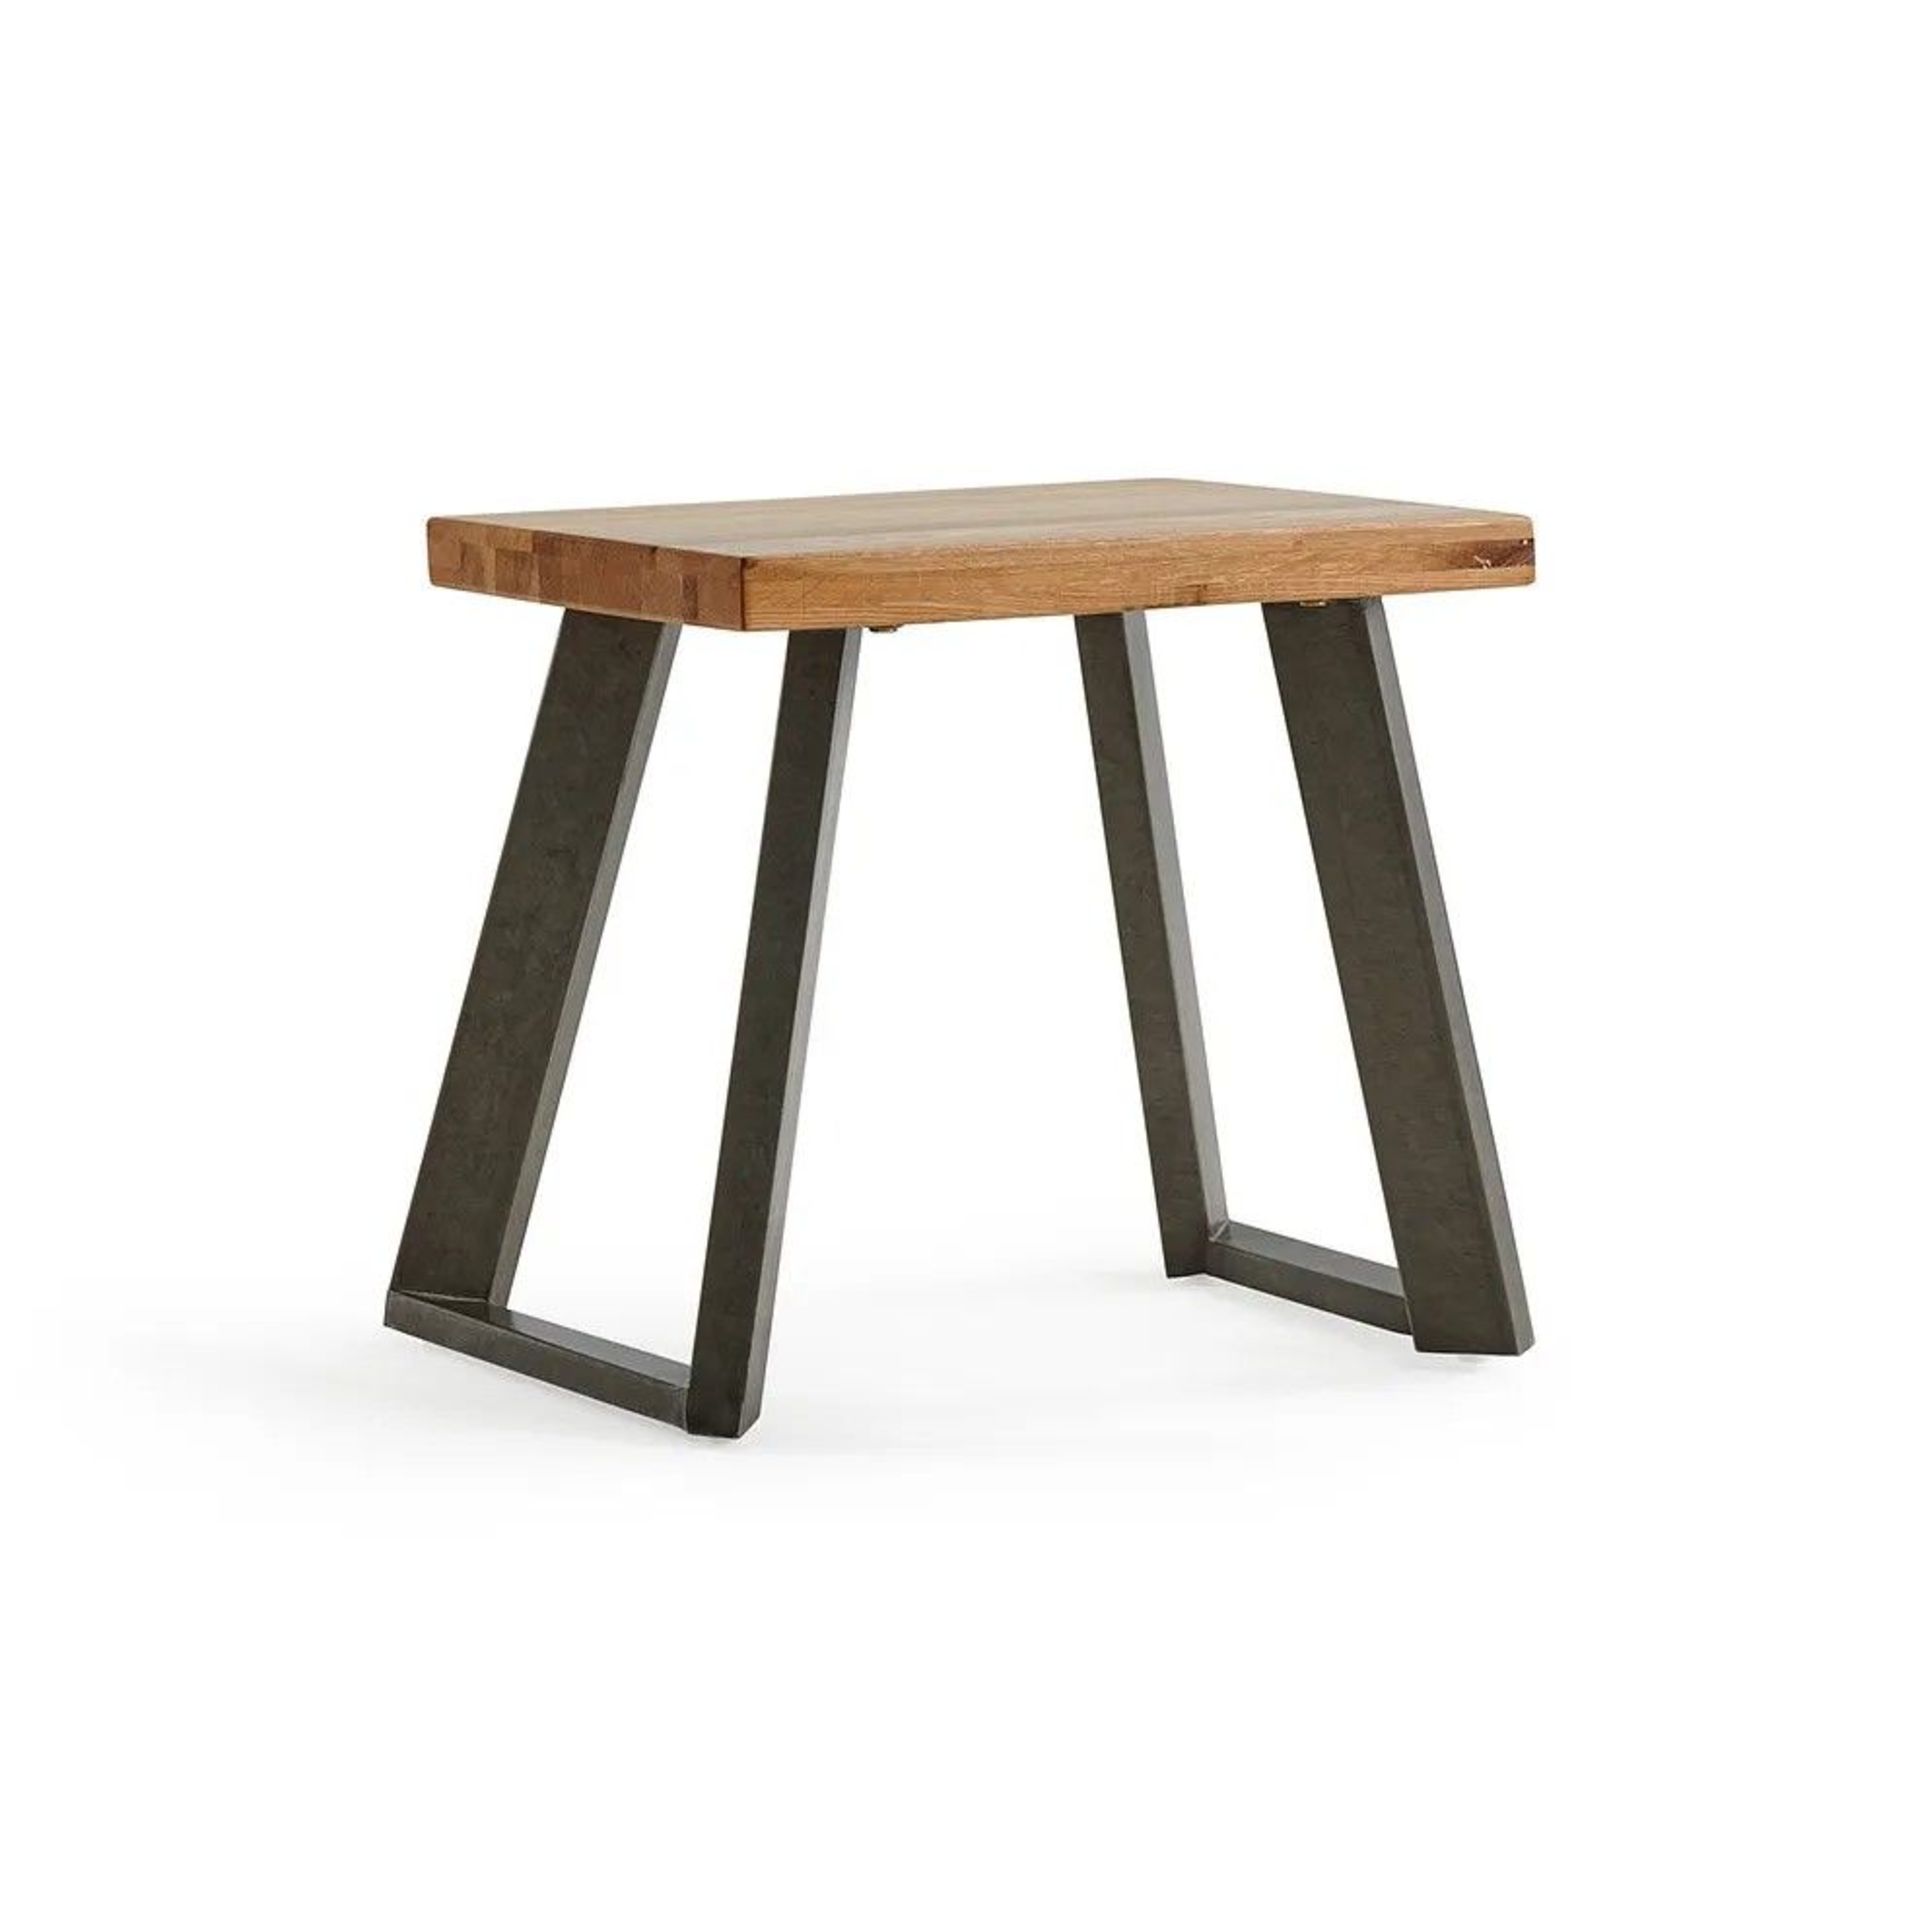 NEW BOXED Cantelever Natural Solid Oak & Metal Stool. RRP £130. For a more open seating